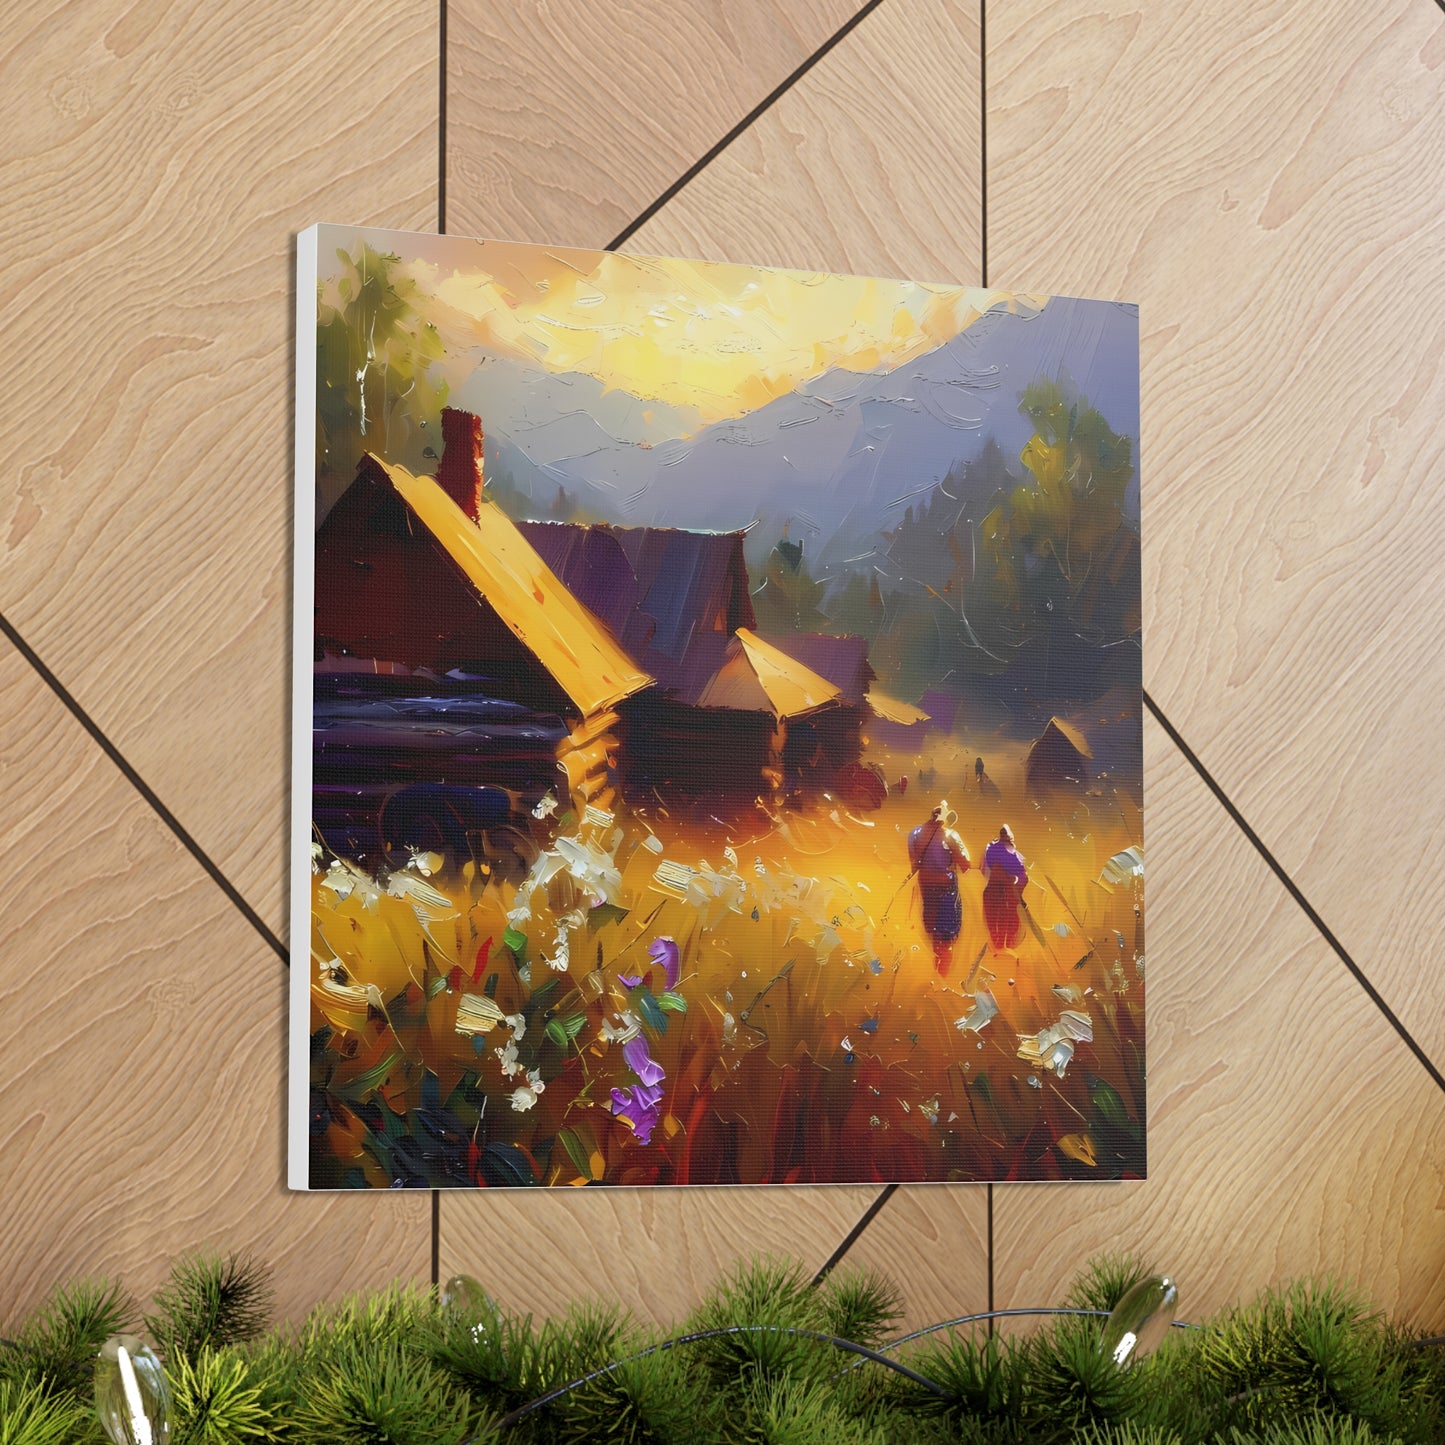 Unique Landscape Wall Art Canvas Gallery Wraps - Romantic Cottage Country Framed Canvas Wall Art